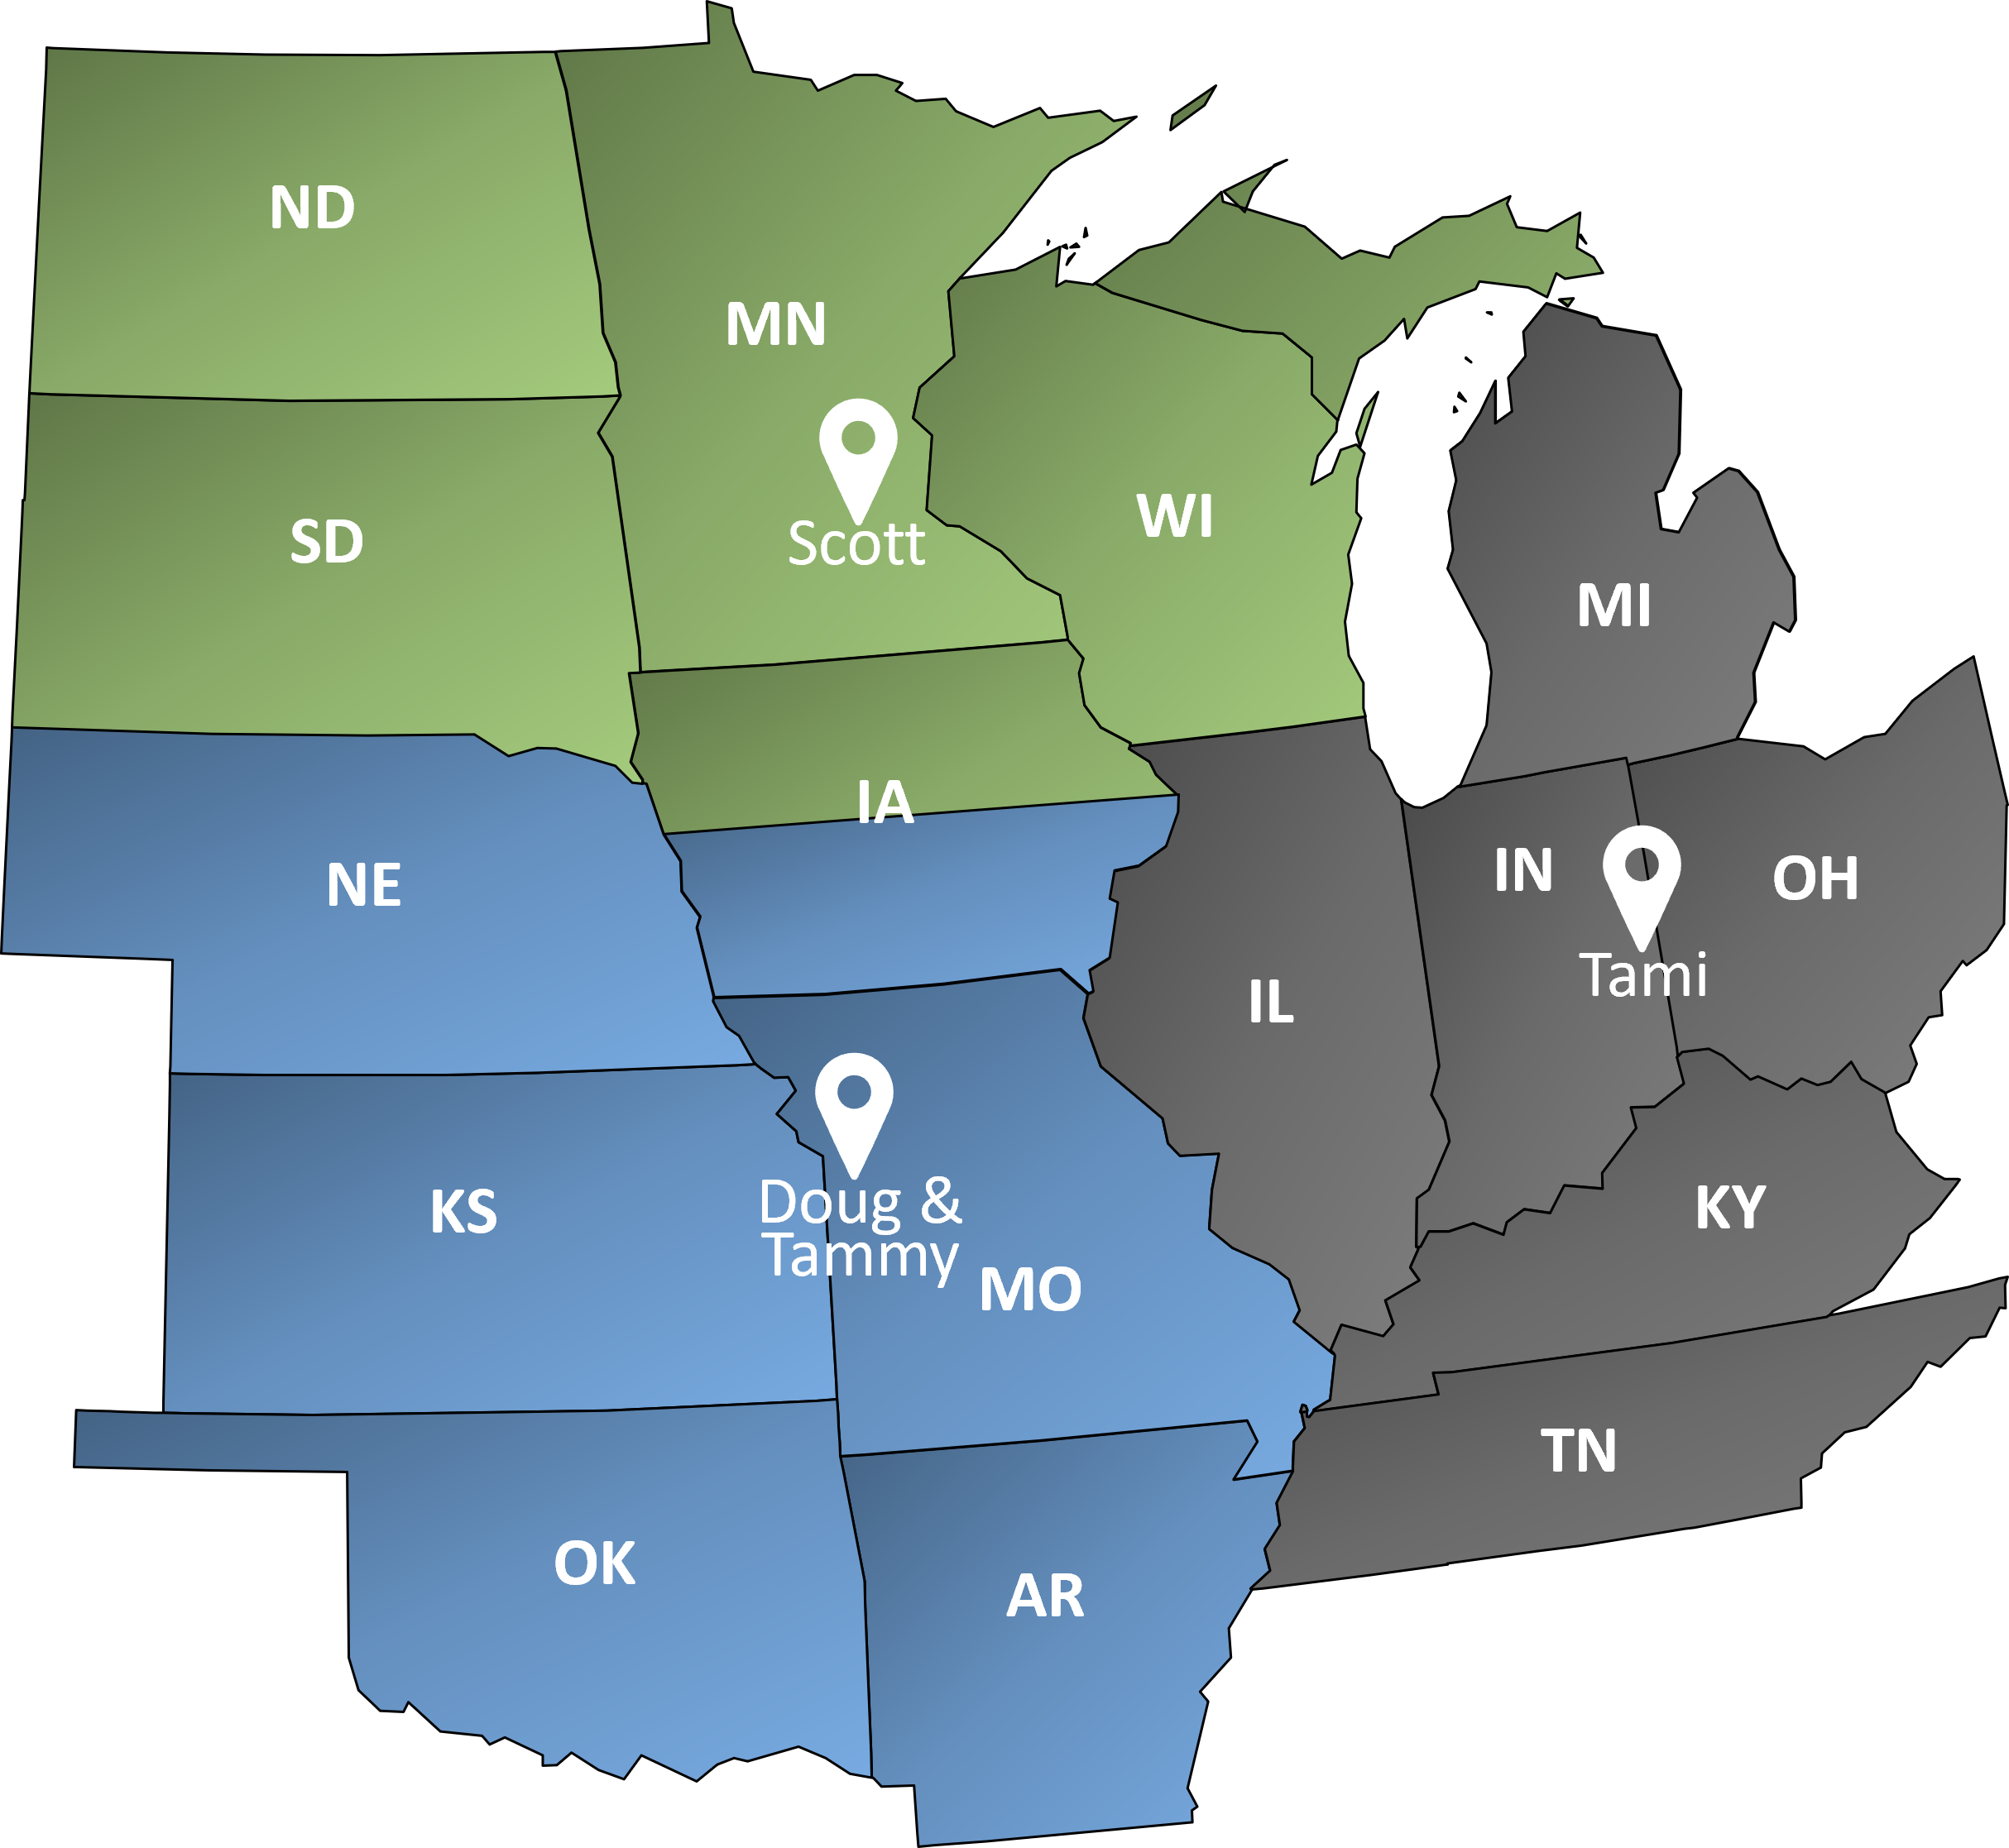 We're well positioned to cover accounts across the Midwest